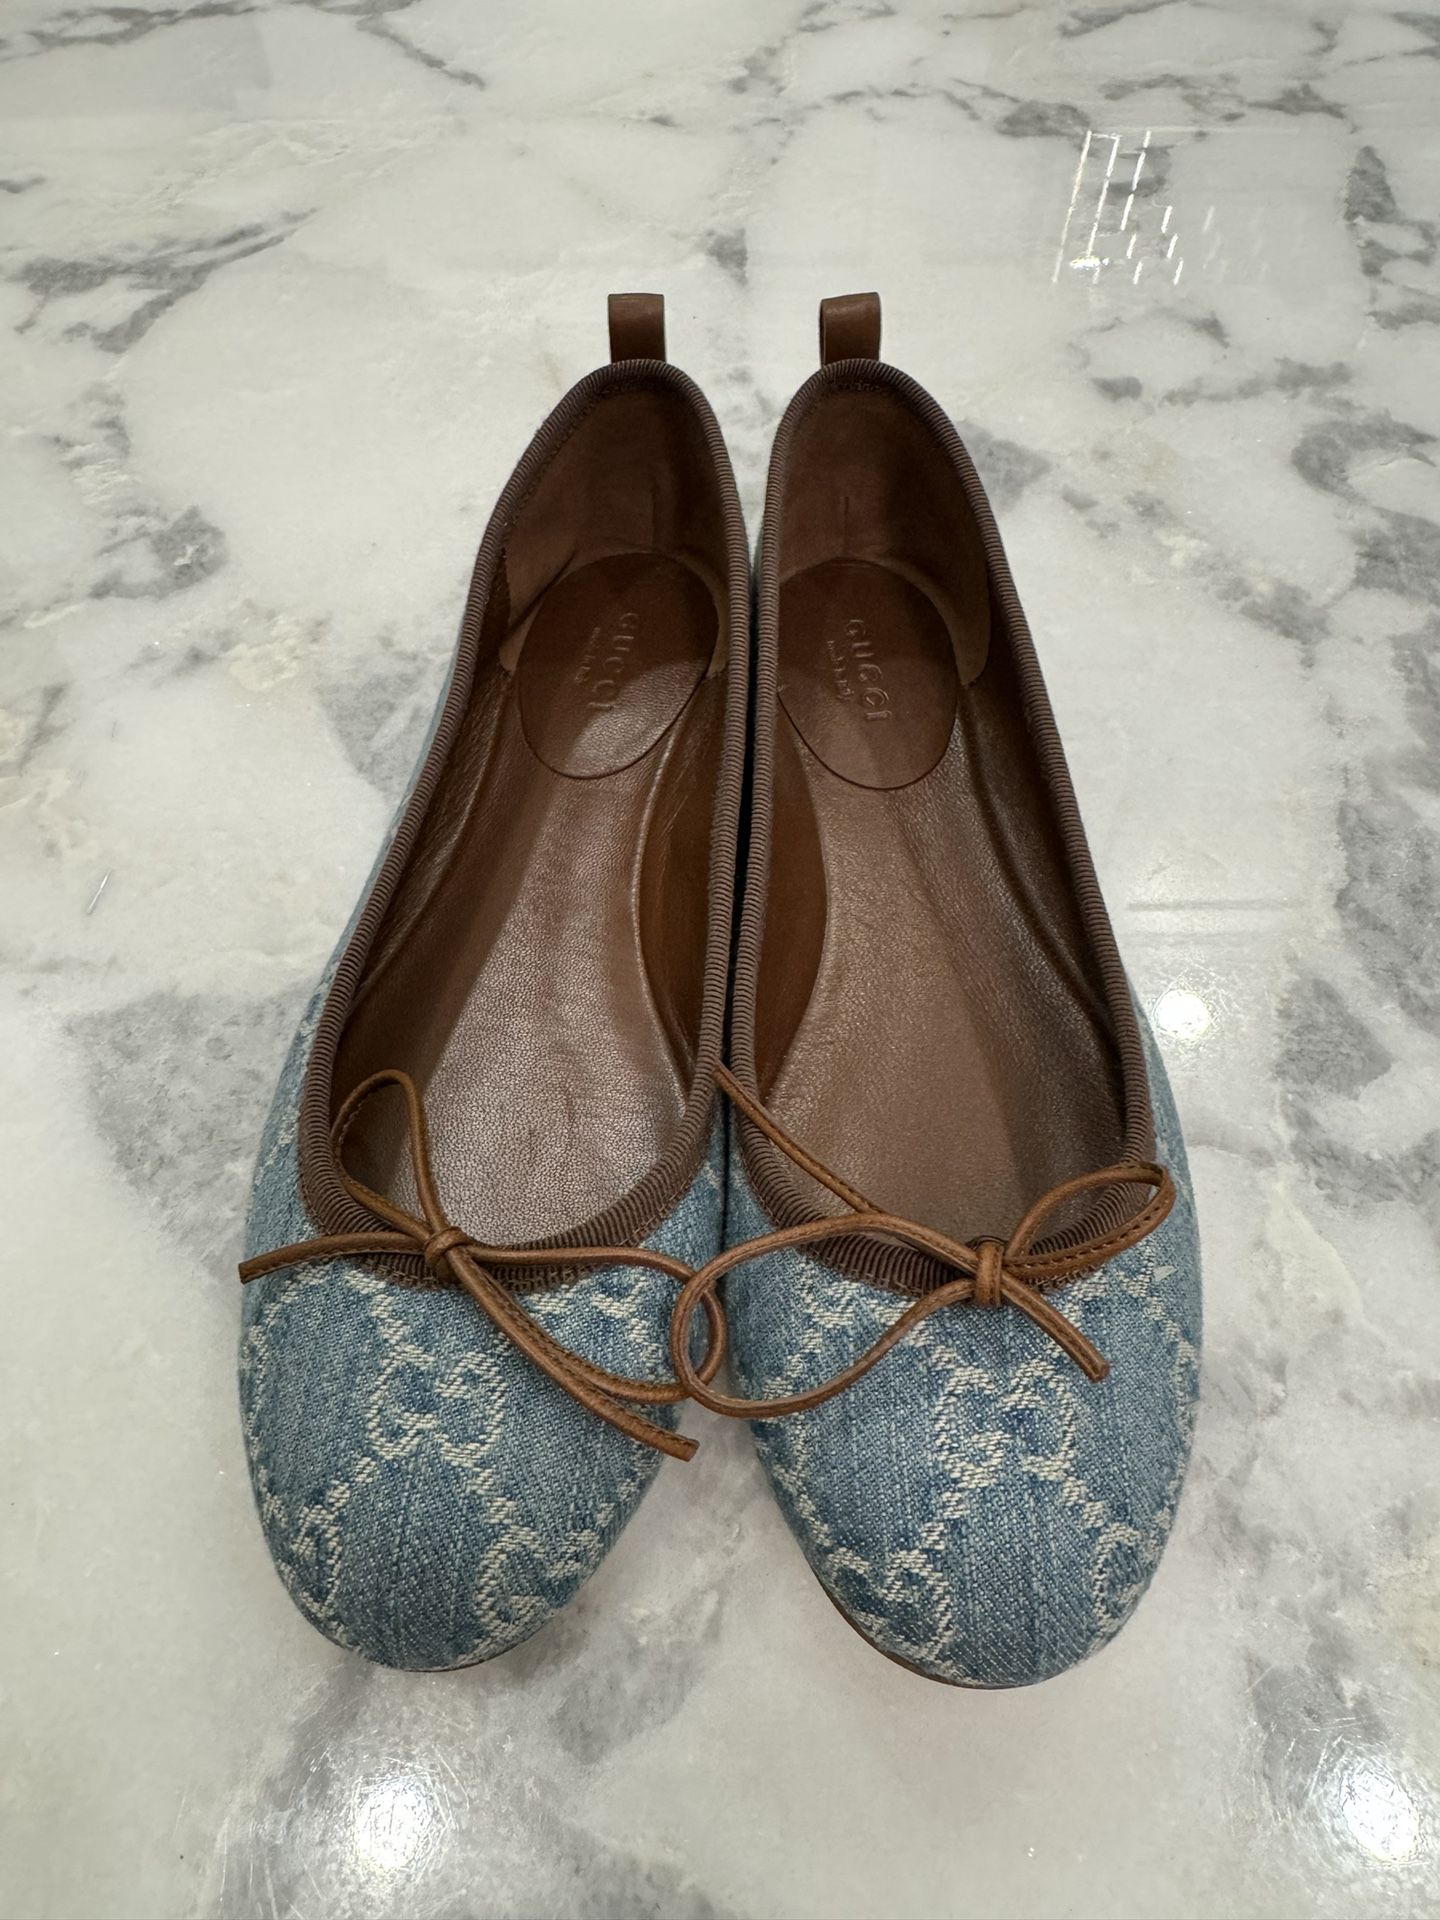 GUCCI GG Signature Printed Ballet Flats Size: 36 - excellent condition - Originally $650.   Asking $215